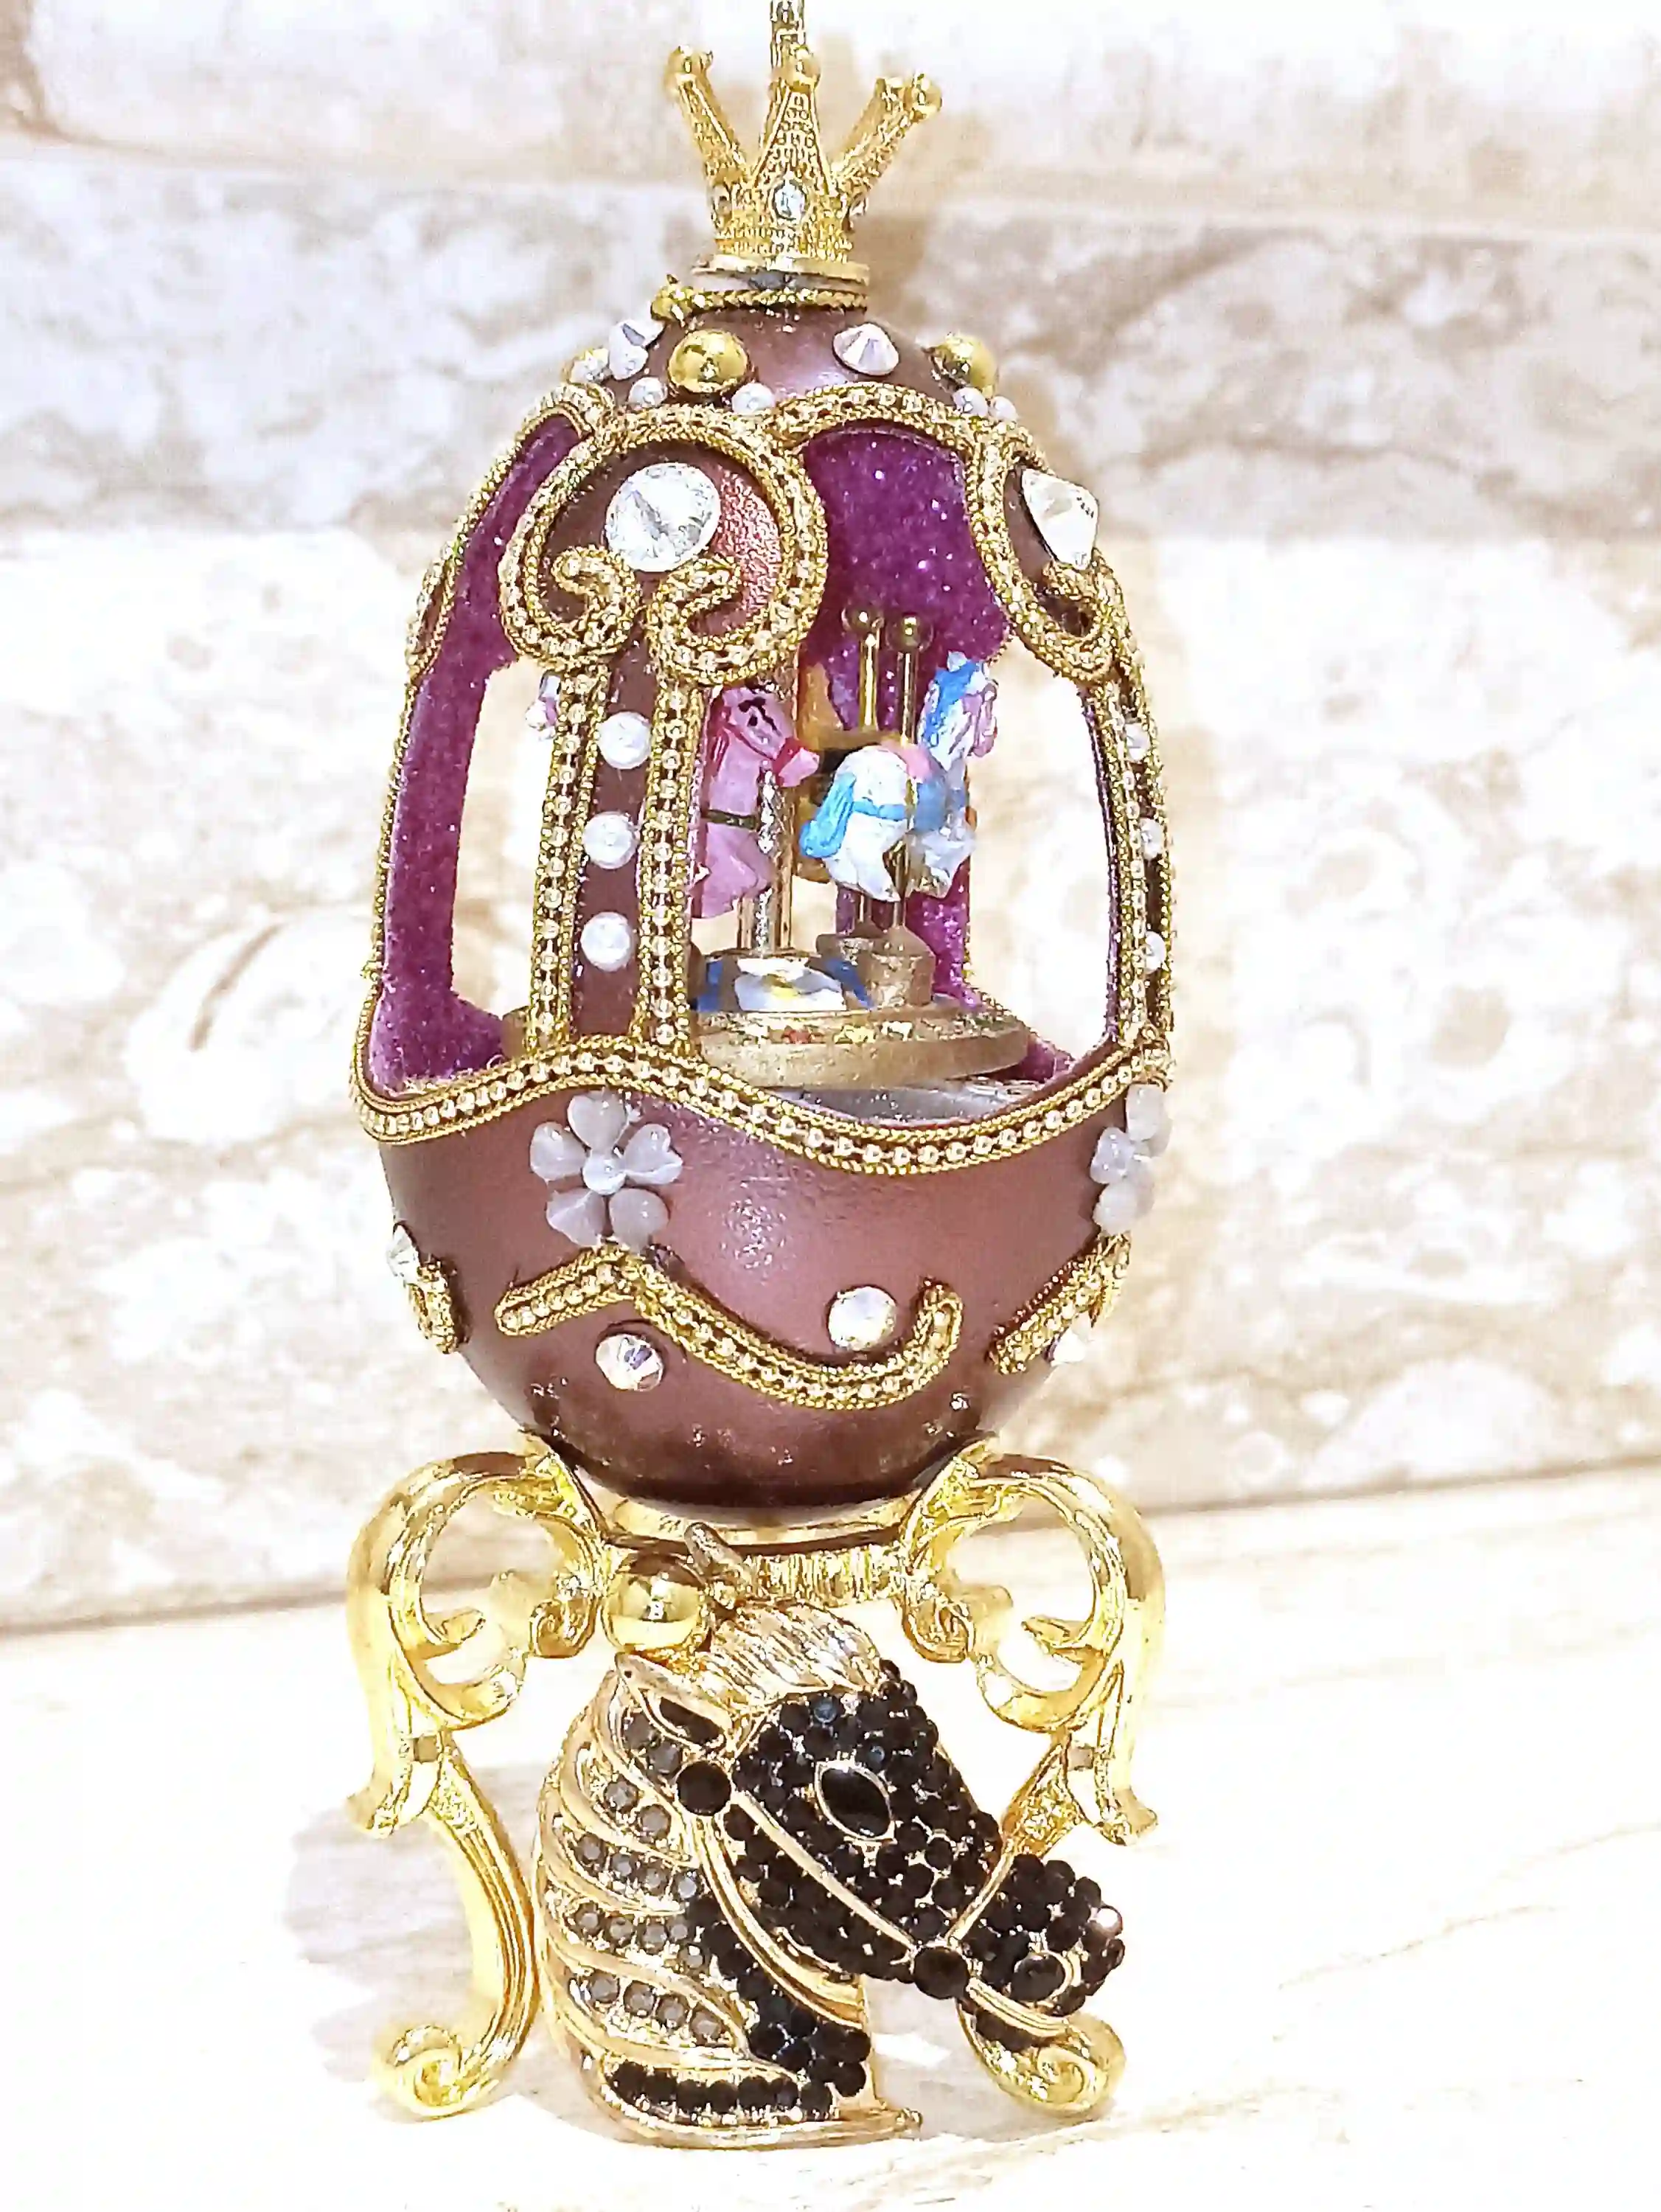 ONE Of a KIND FABERGE egg style Horses Musical Carousel Born in 2003 Faberge Egg Necklace Egg Faberge Bracelet Unique gift 18th Birthday 24k 